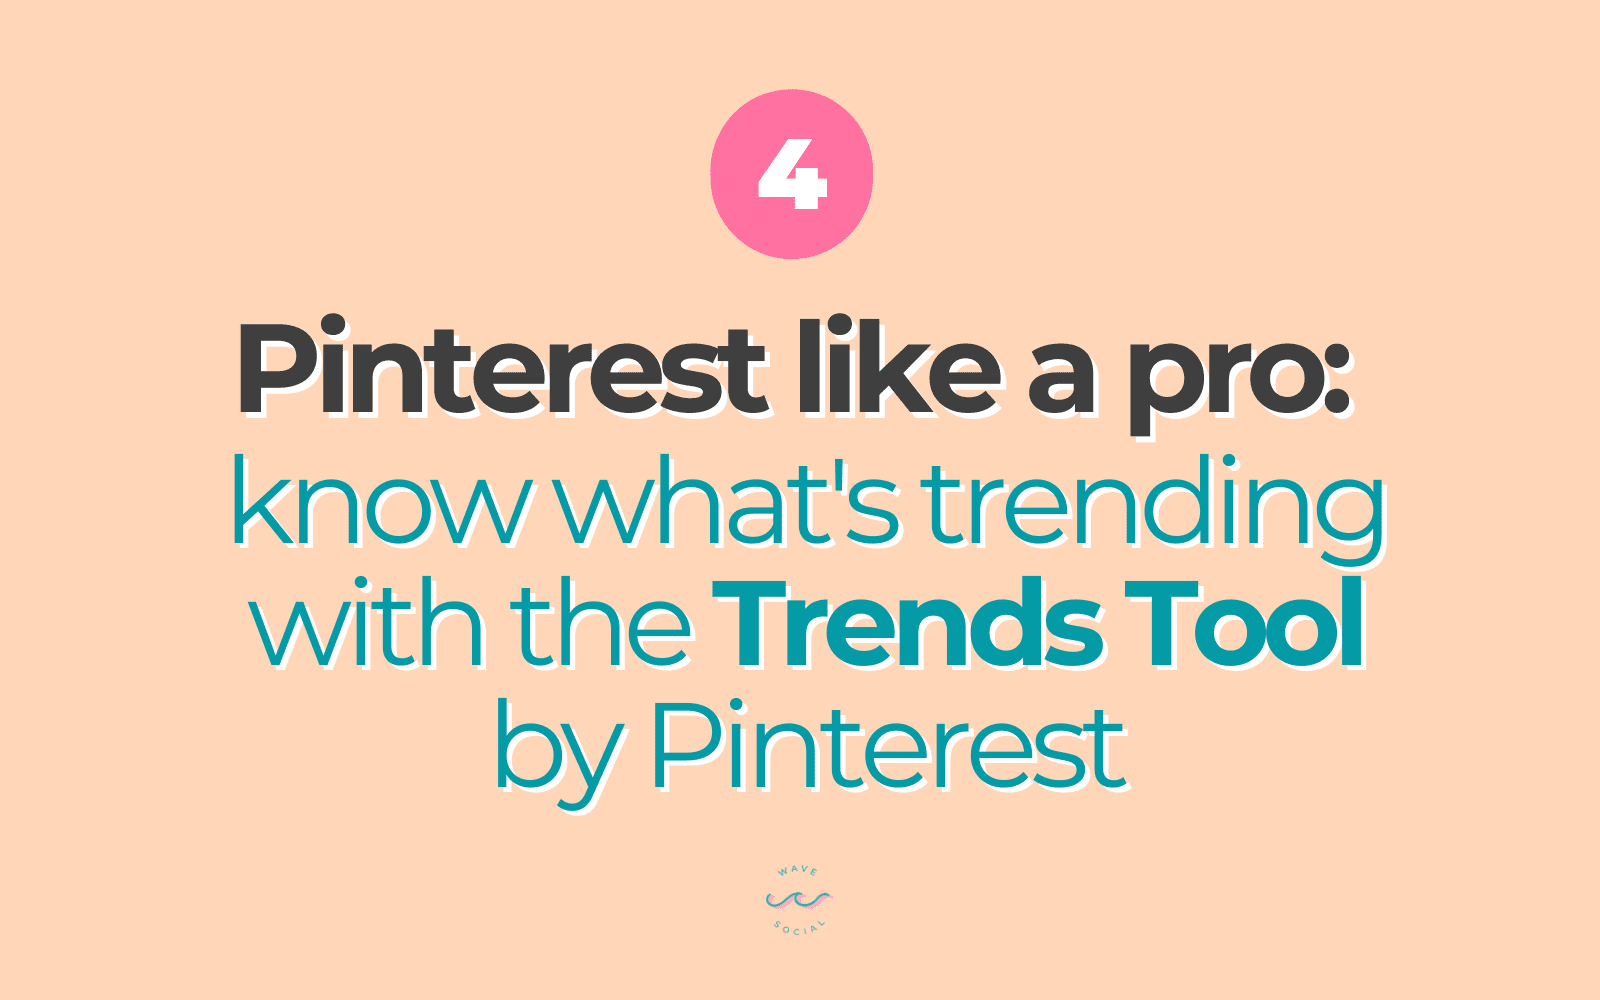 pinterest like a pro: know what's trending with the Trends Tool by Pinterest